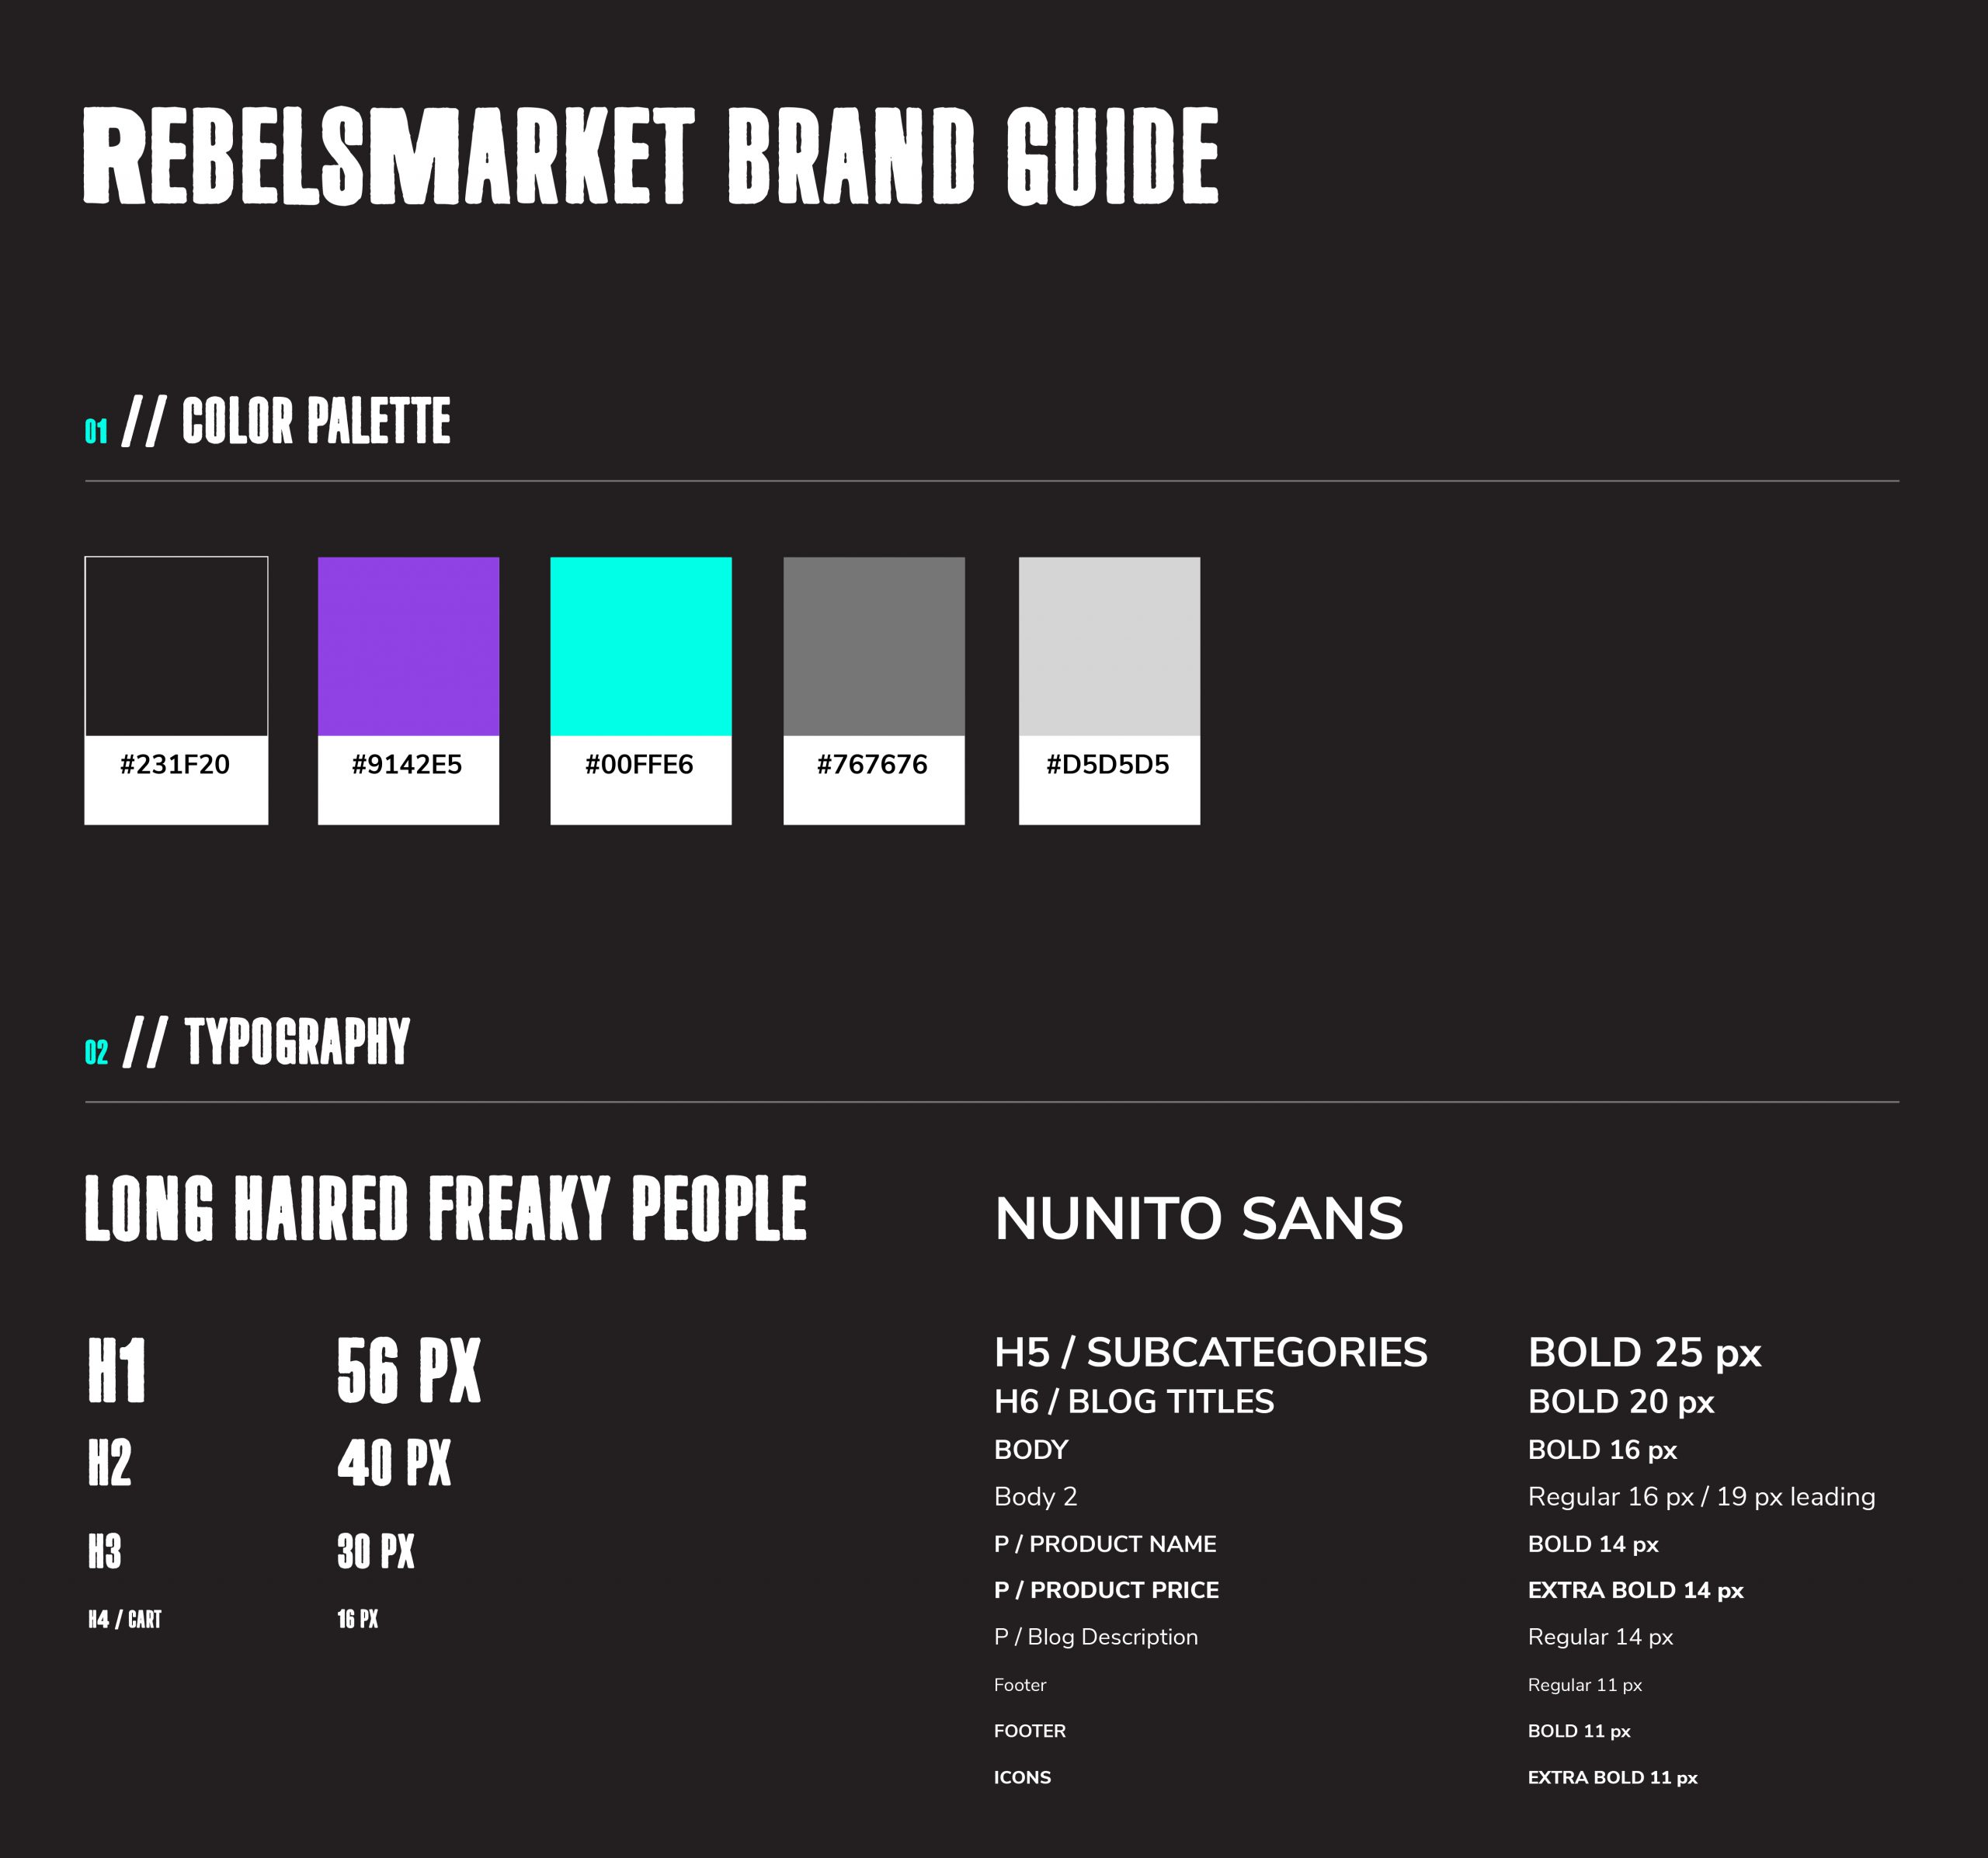 Brand colors and typography